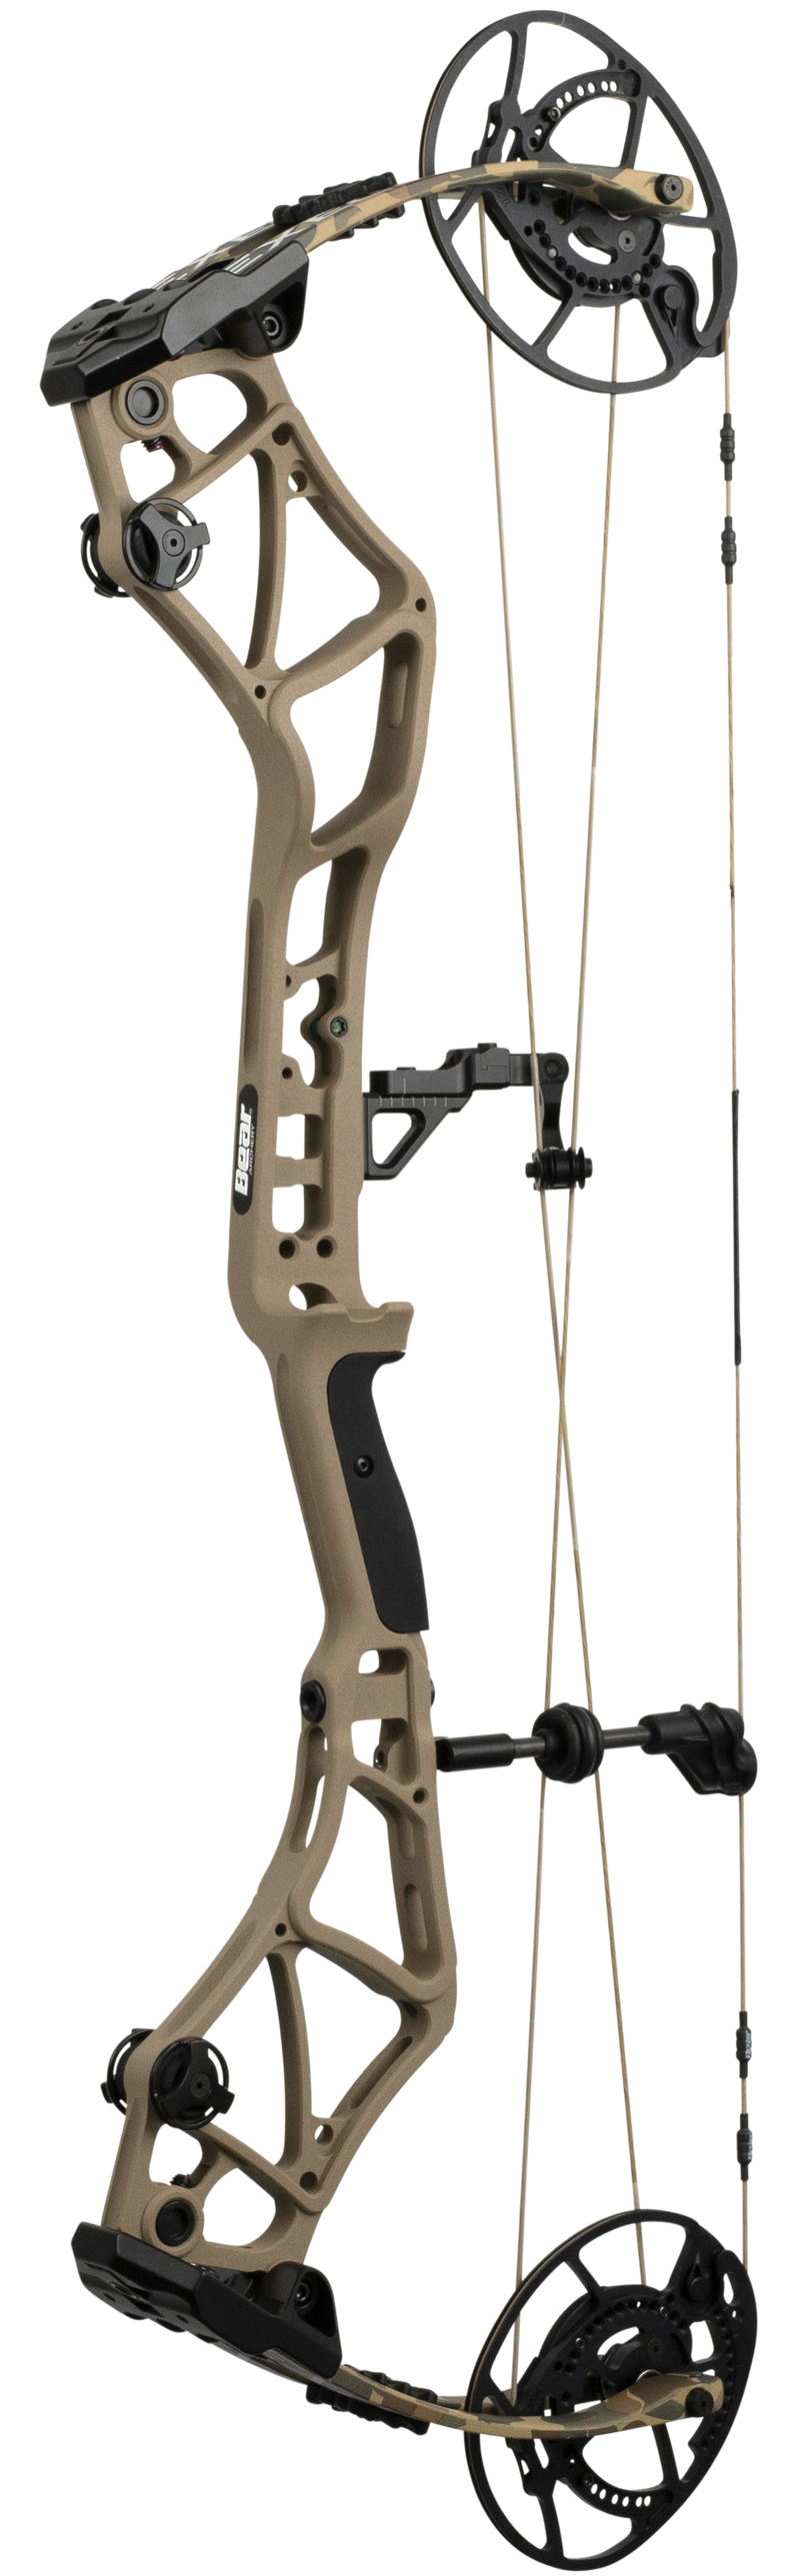 Bear Execute 32 Compound Bow - Adult_1